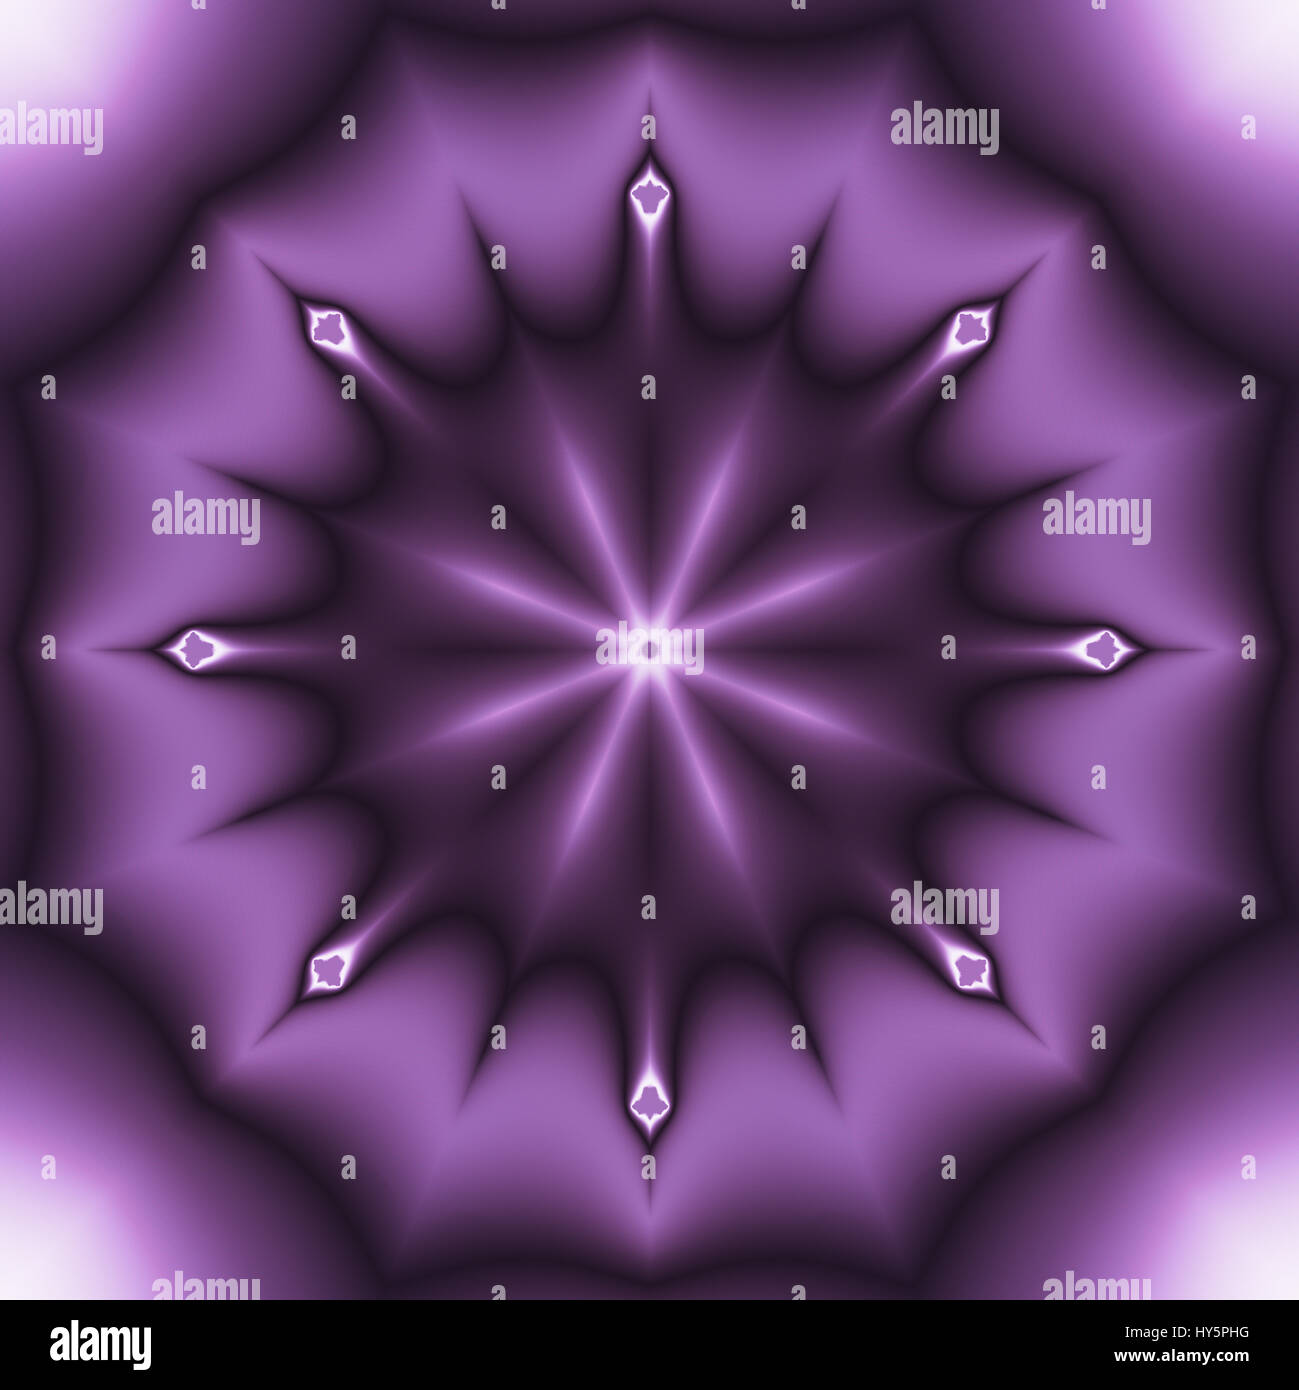 Purple 3d effect digital fractal image in eight pointed star shape in square format Stock Photo